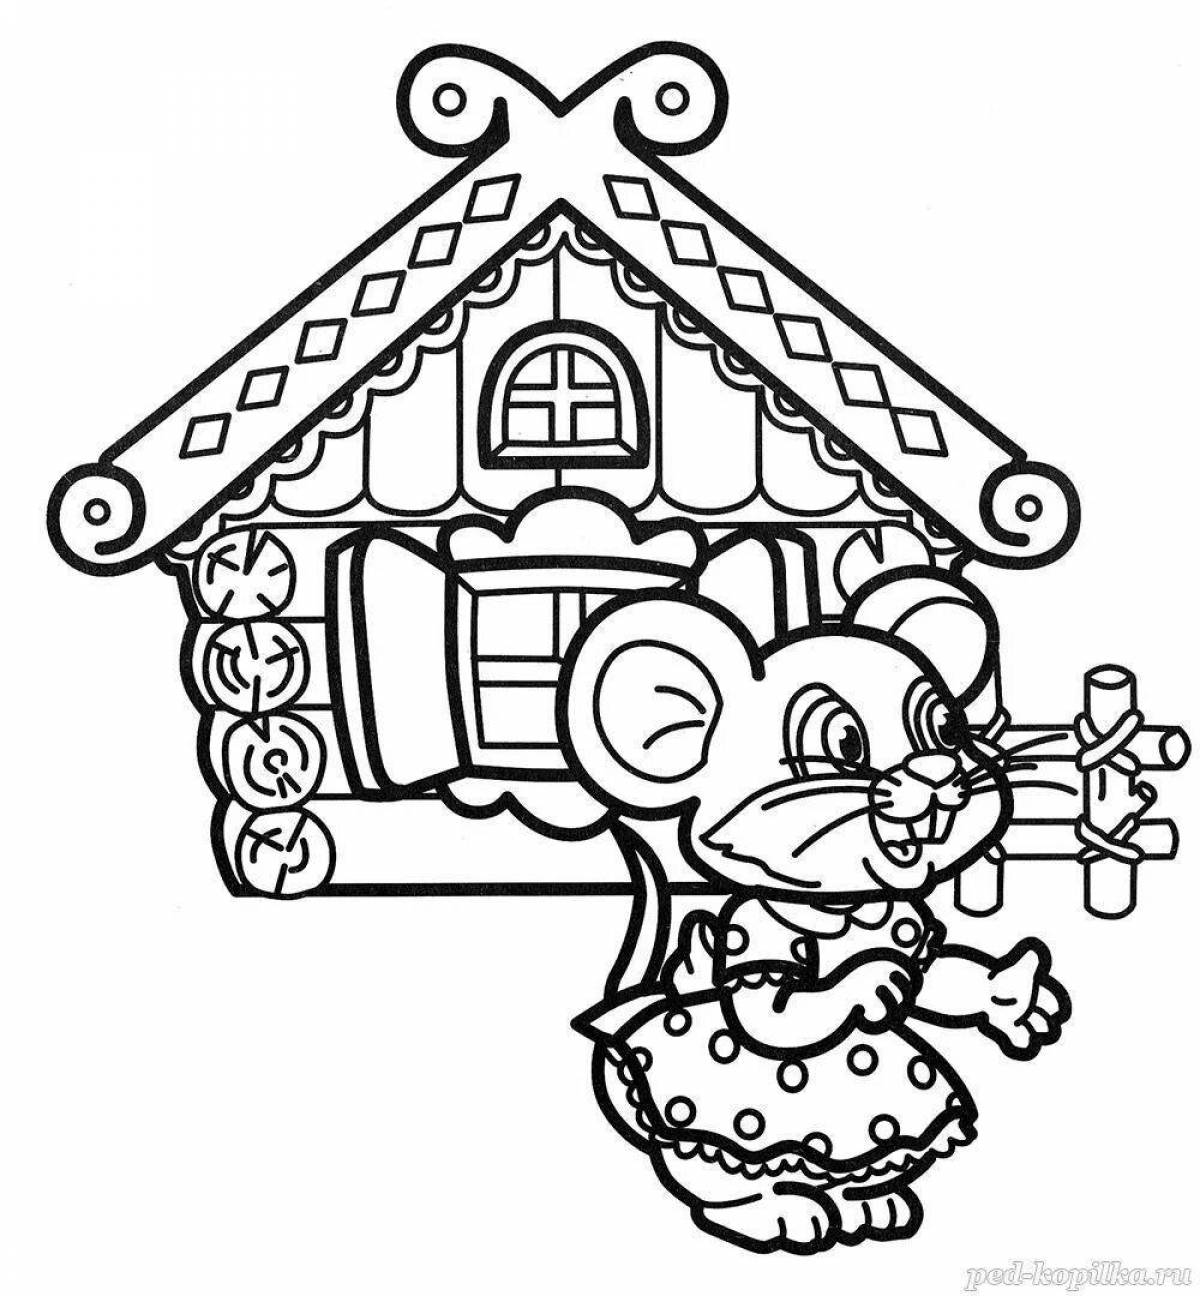 Teremok character coloring page